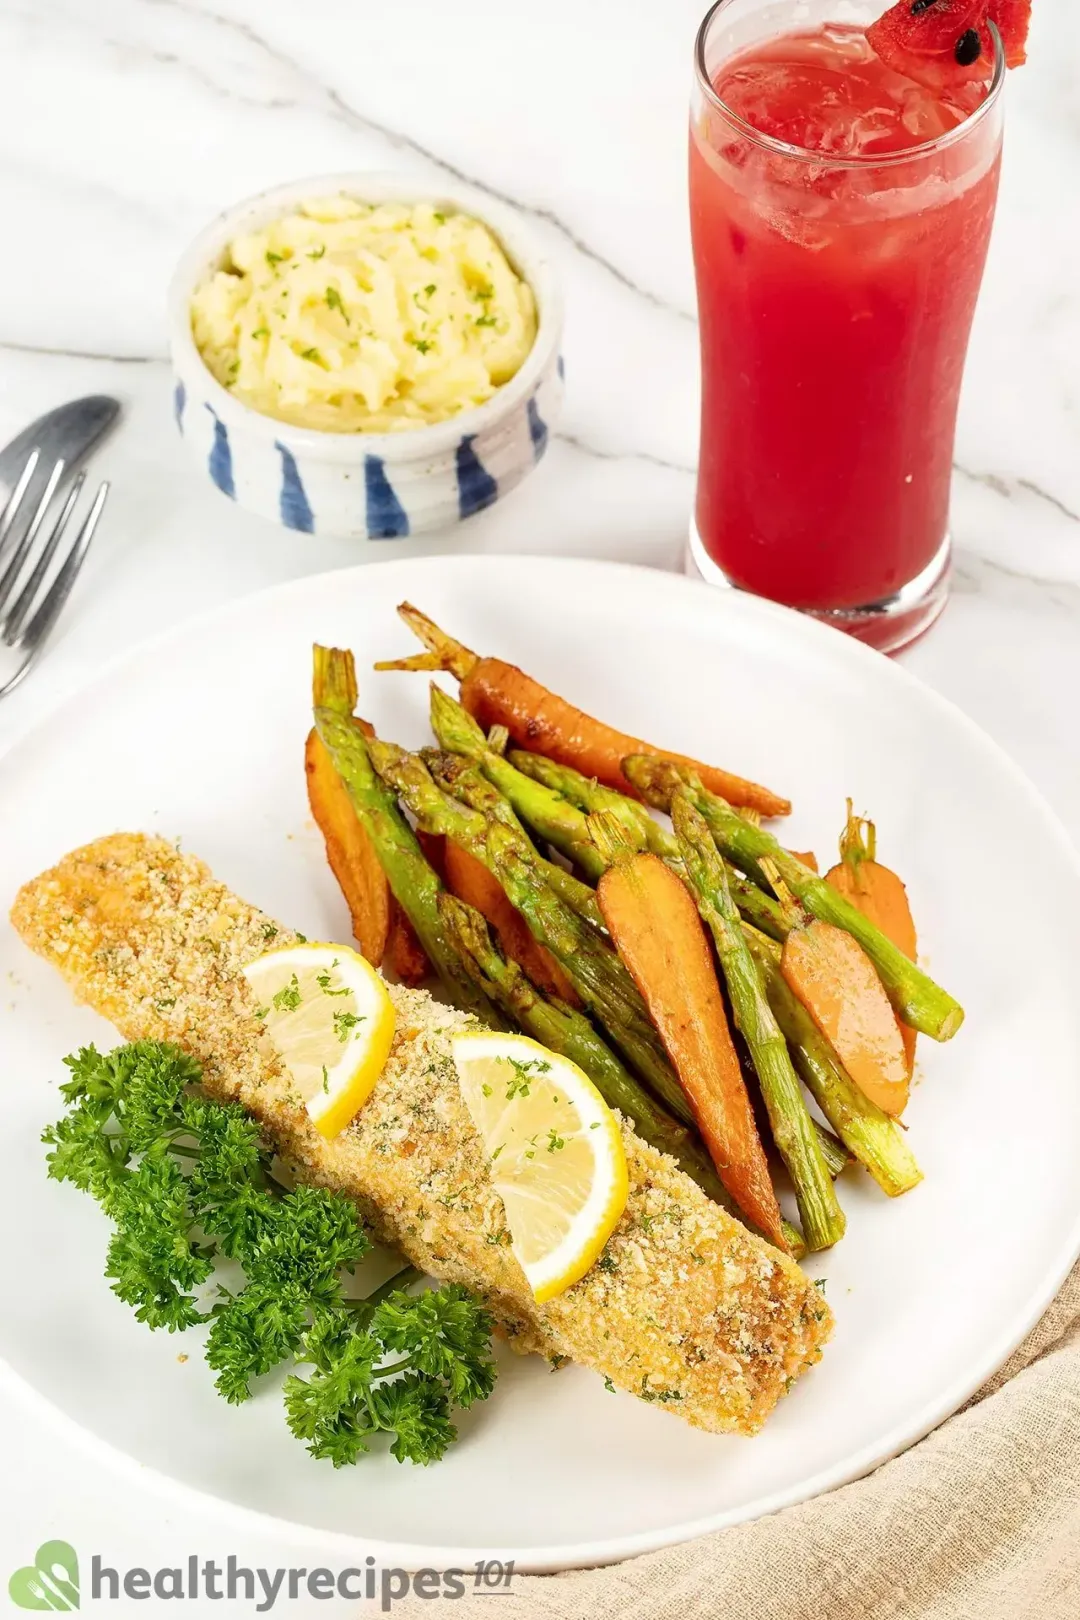 A white plate containing a salmon fillet crusted with breadcrumbs, some baby carrots, asparagus stalks, two lemon pieces, and parsley laid next to mashed potatoes and watermelon juice